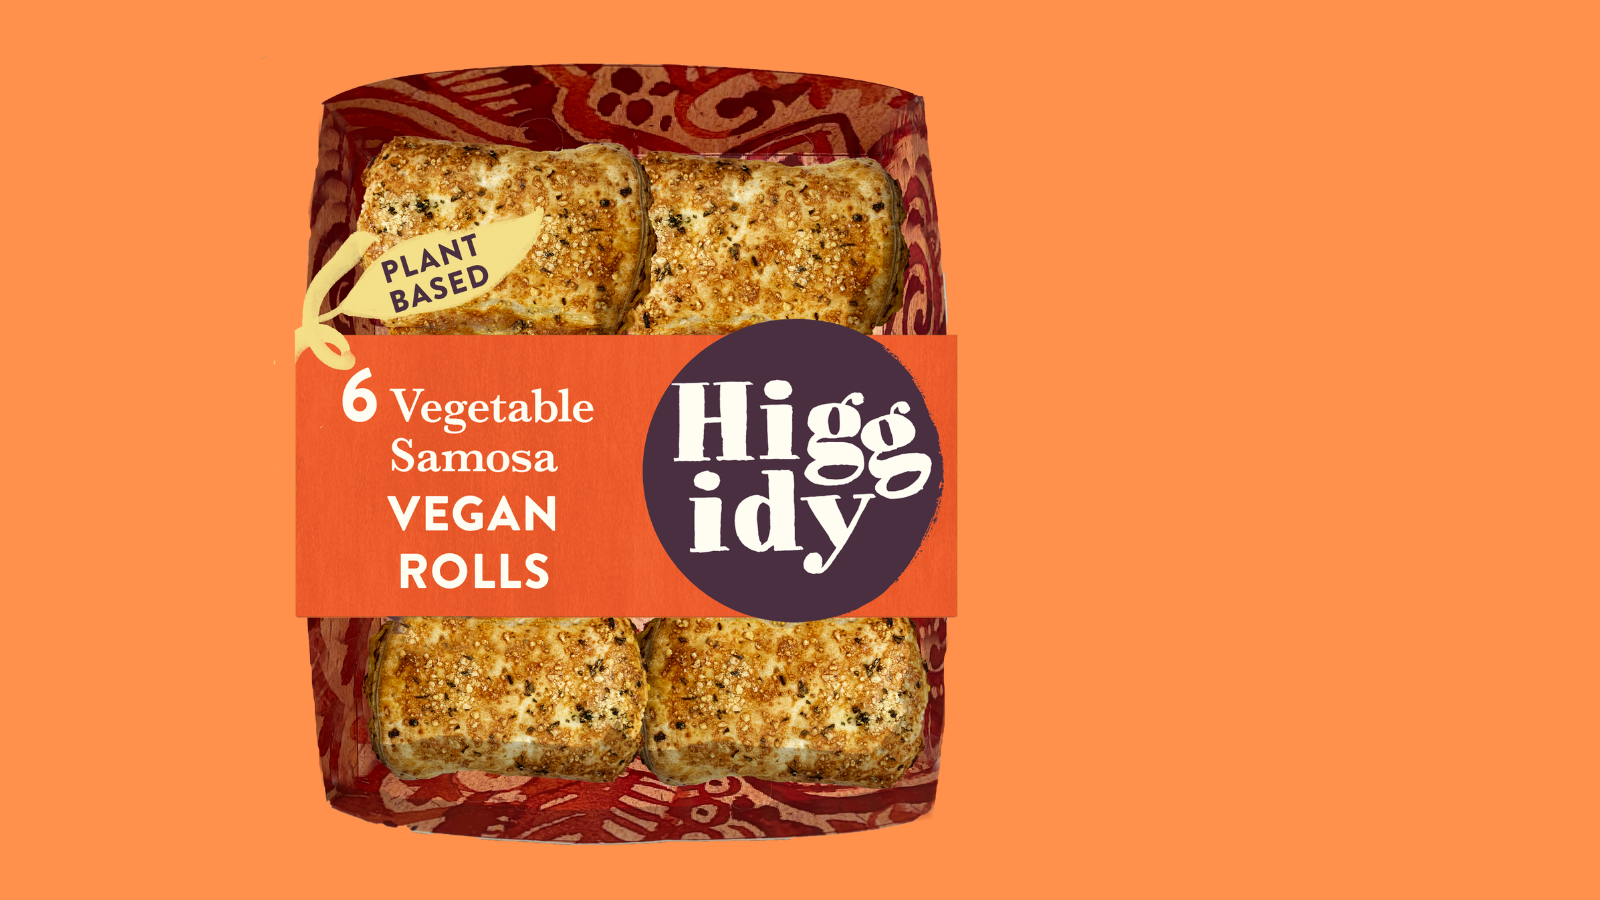 Higgidy unveils a new vegan product in Tesco and Waitrose stores in the UK